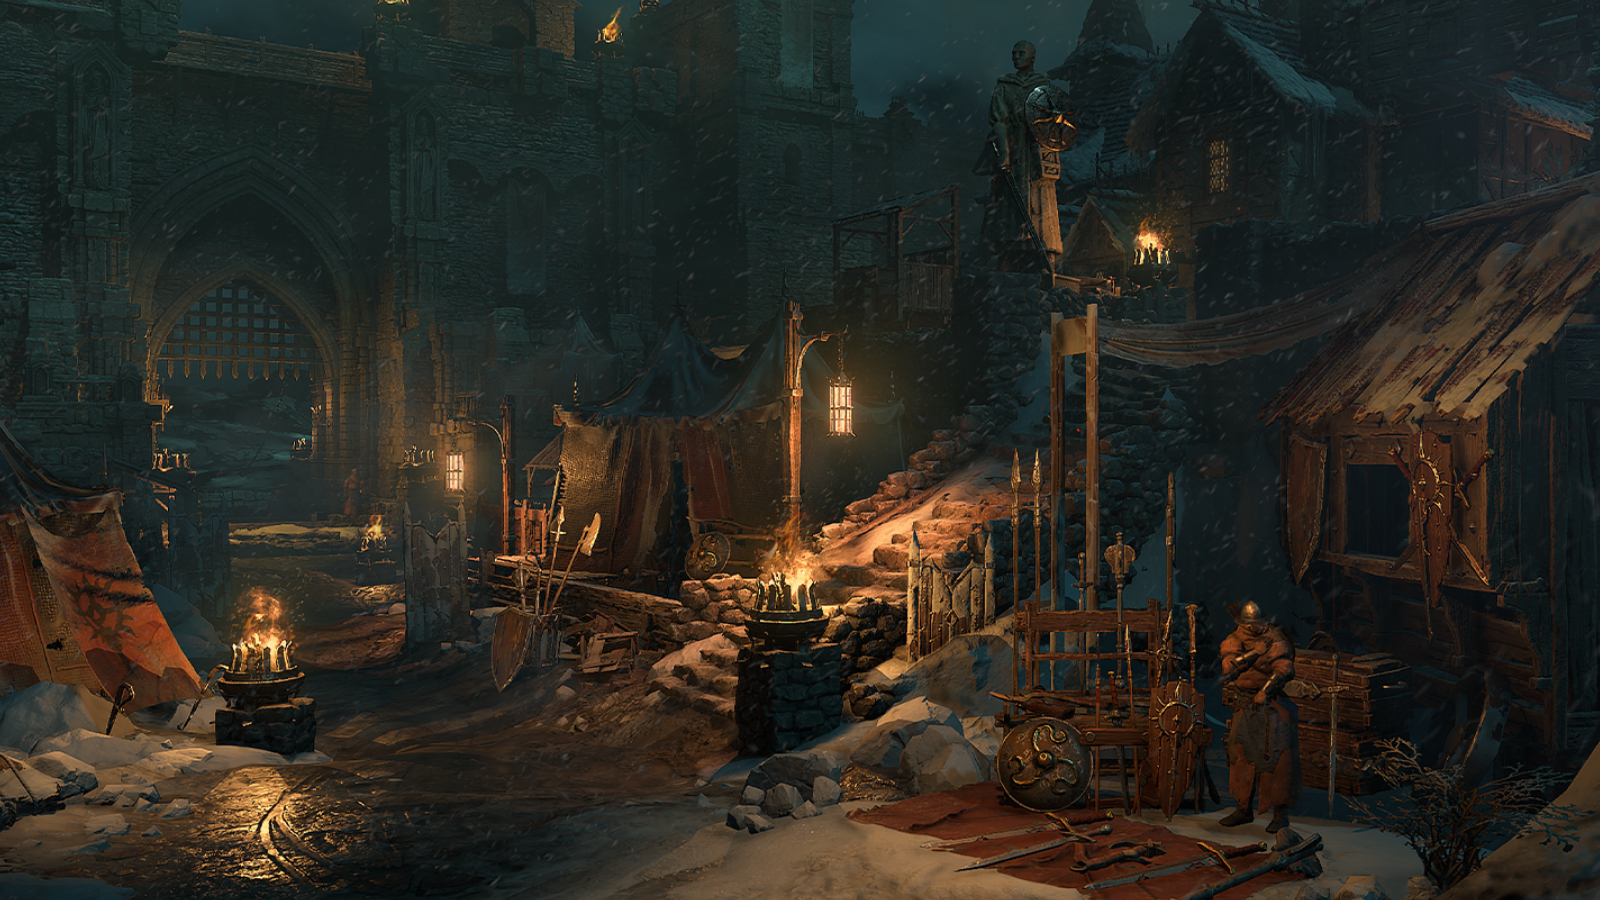 Diablo 4 — the snowy, torchlit streets of nighttime Kyovashad, one of Diablo 4's hub areas.